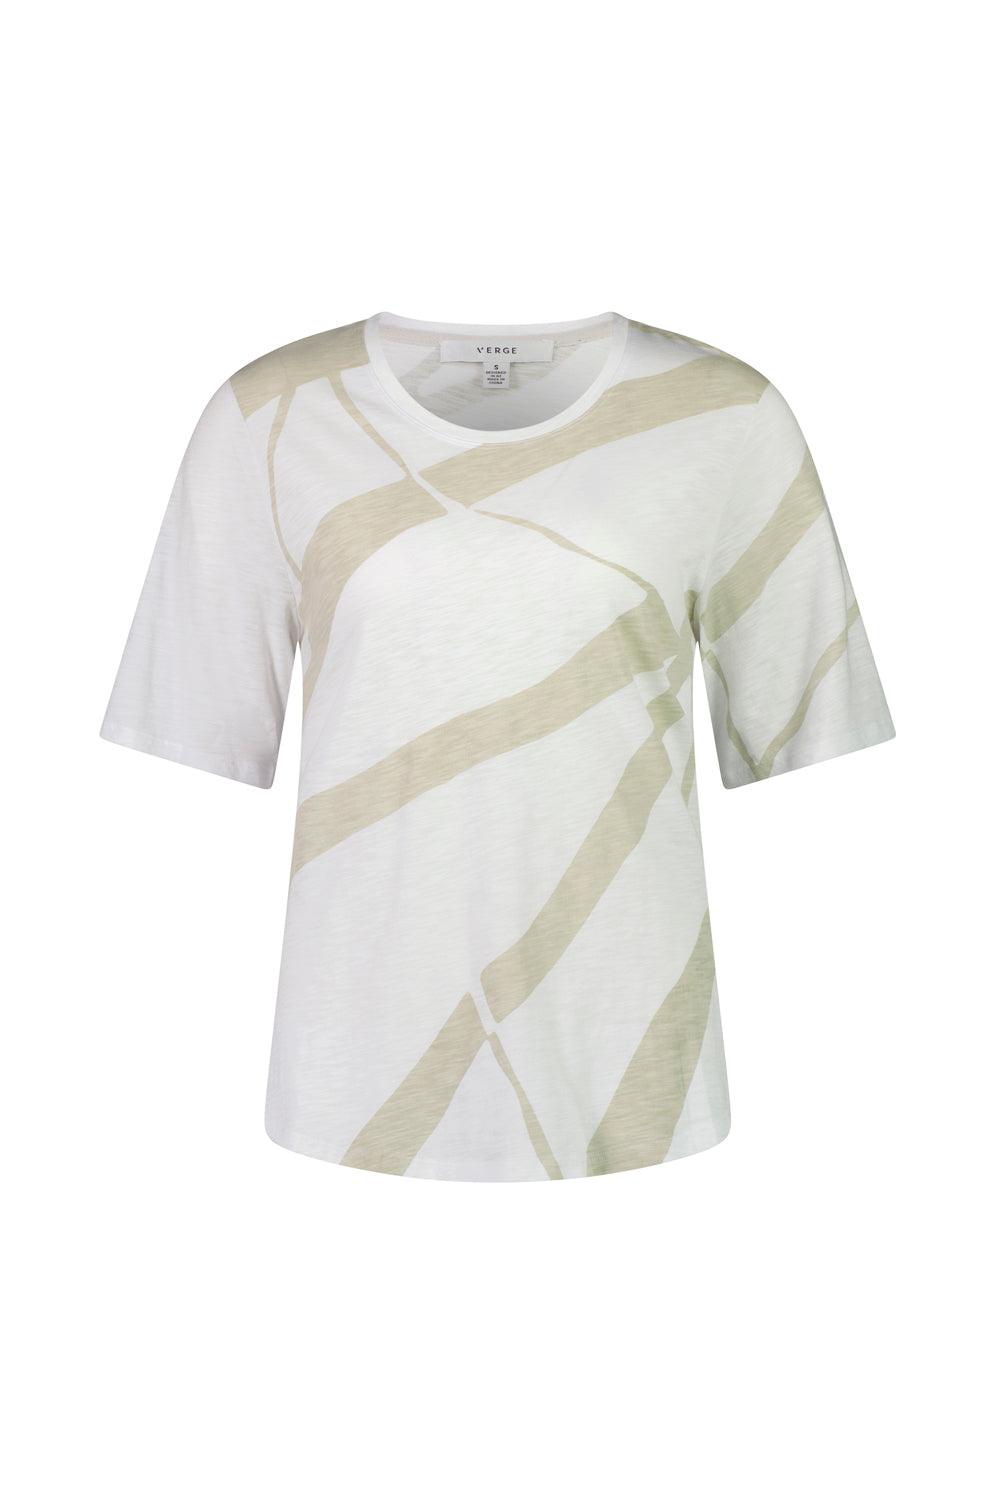 Activate Top - White/Pumice - Tee VERGE